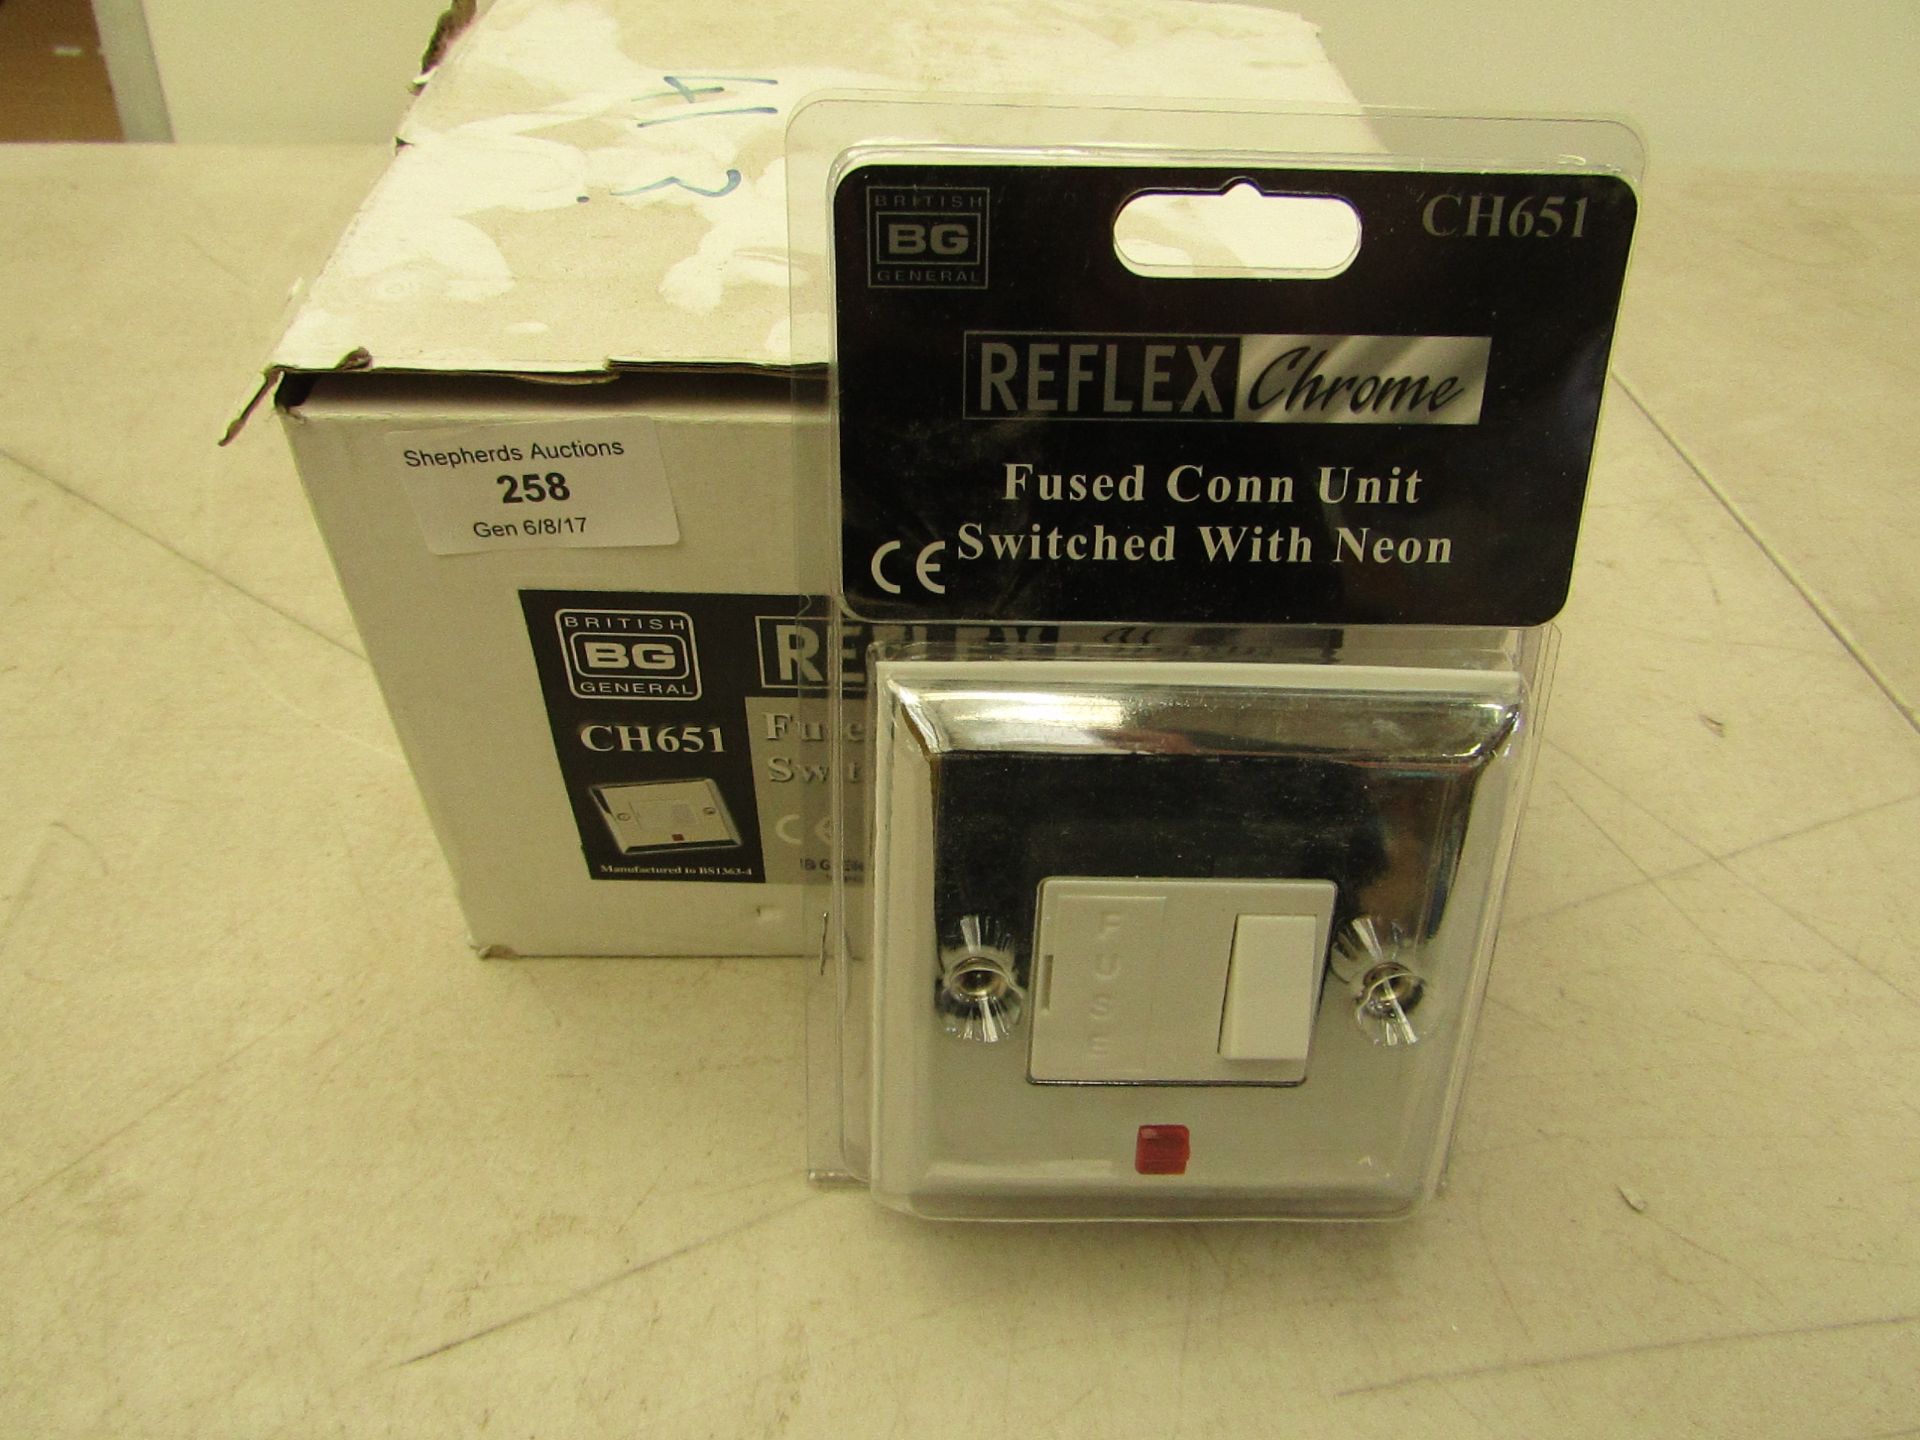 5x Reflex fused connection unit, all new and packaged.